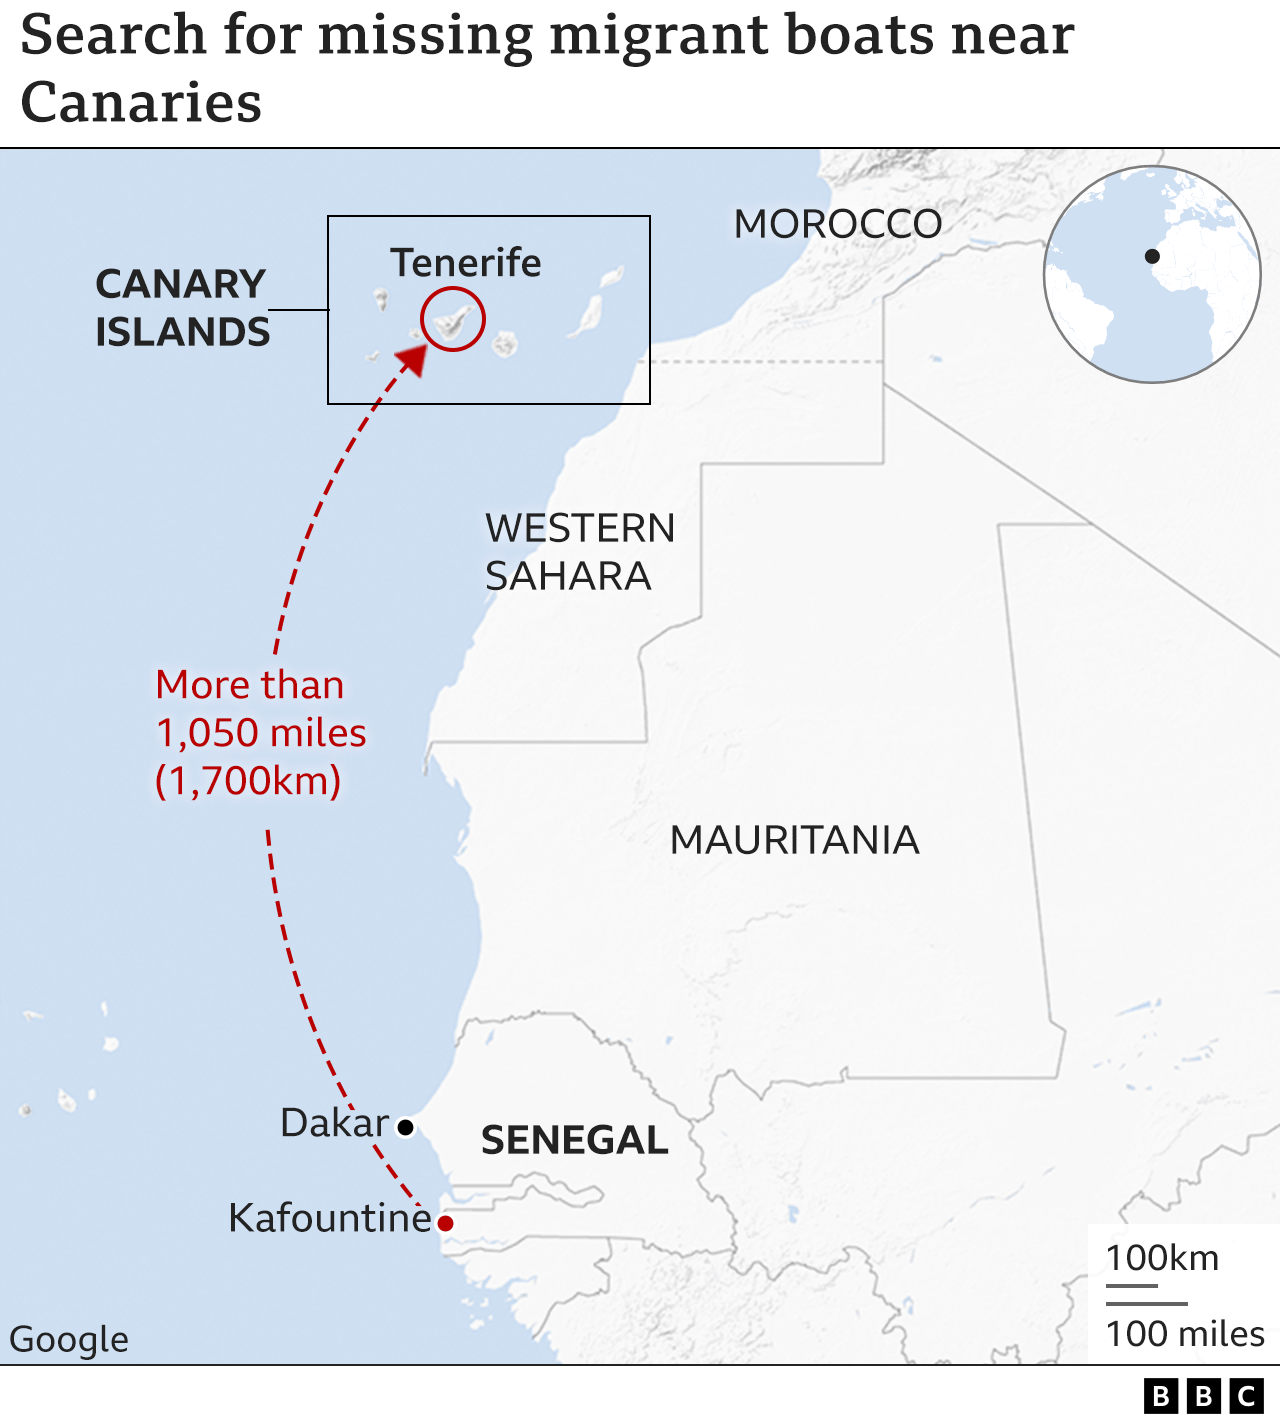 Map shows west coast of Africa and Canaries where search for missing migrant boats taking place